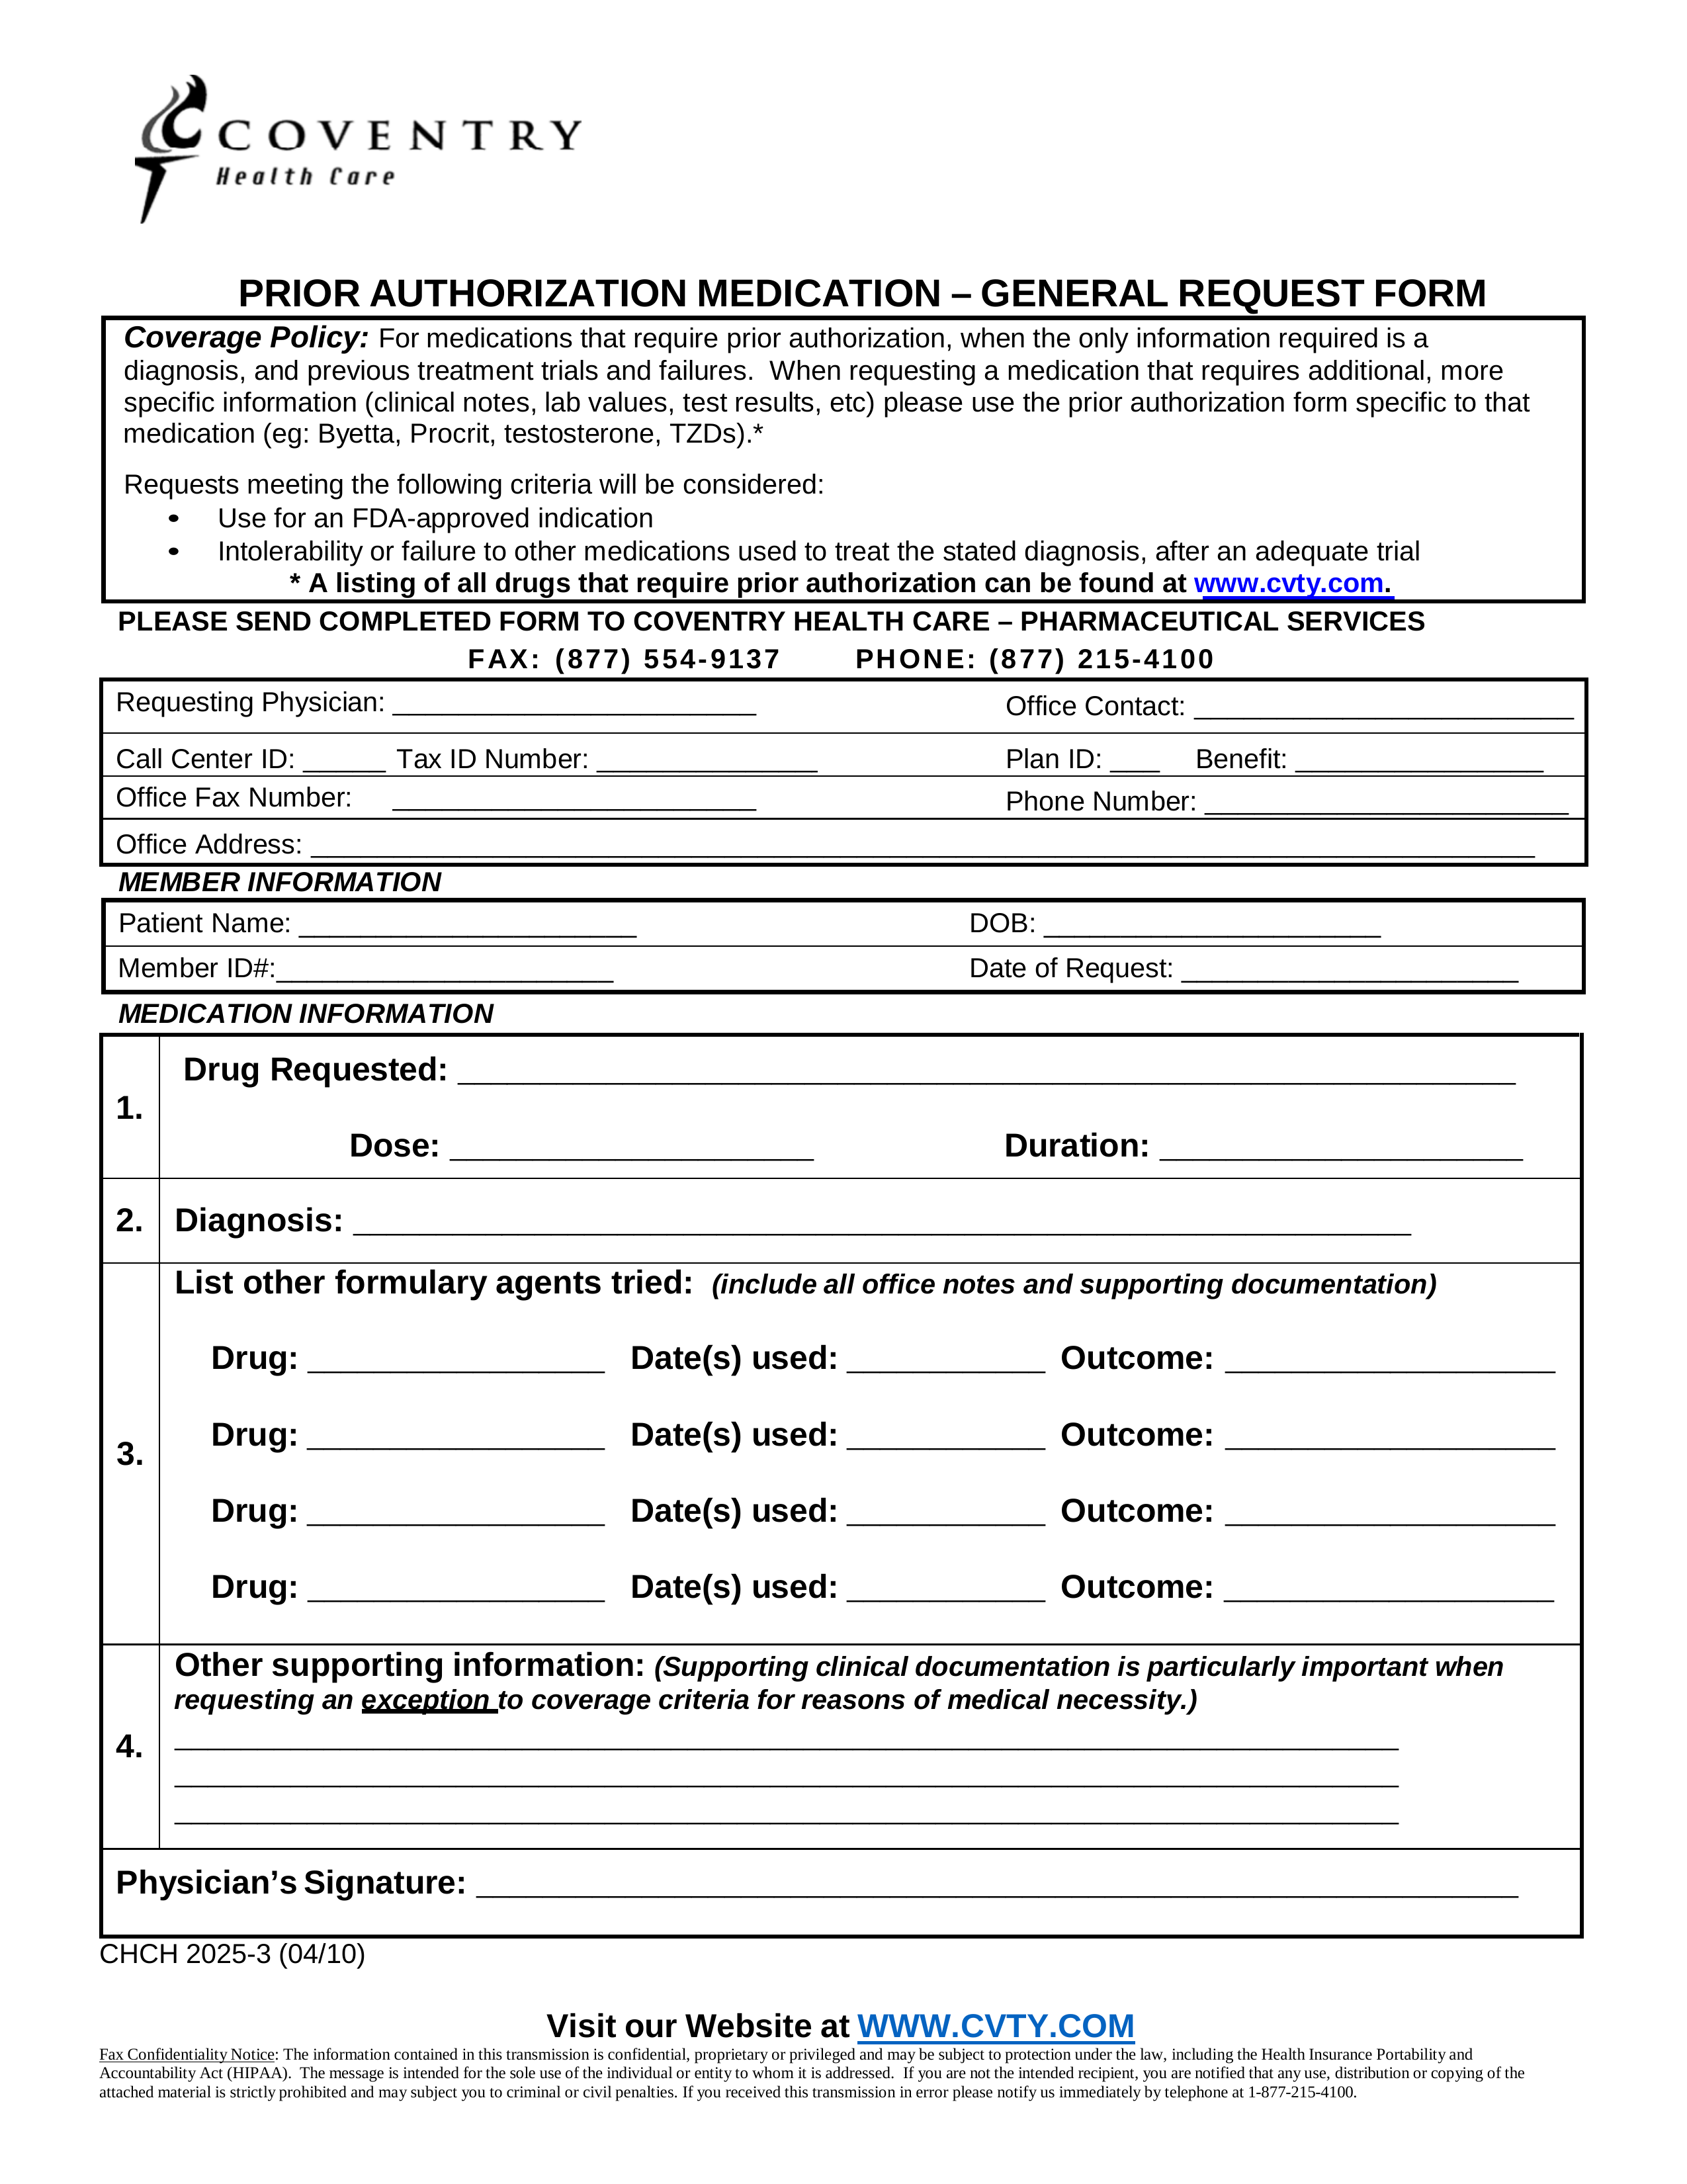 Coventry Health Care Prior (Rx) Authorization Form